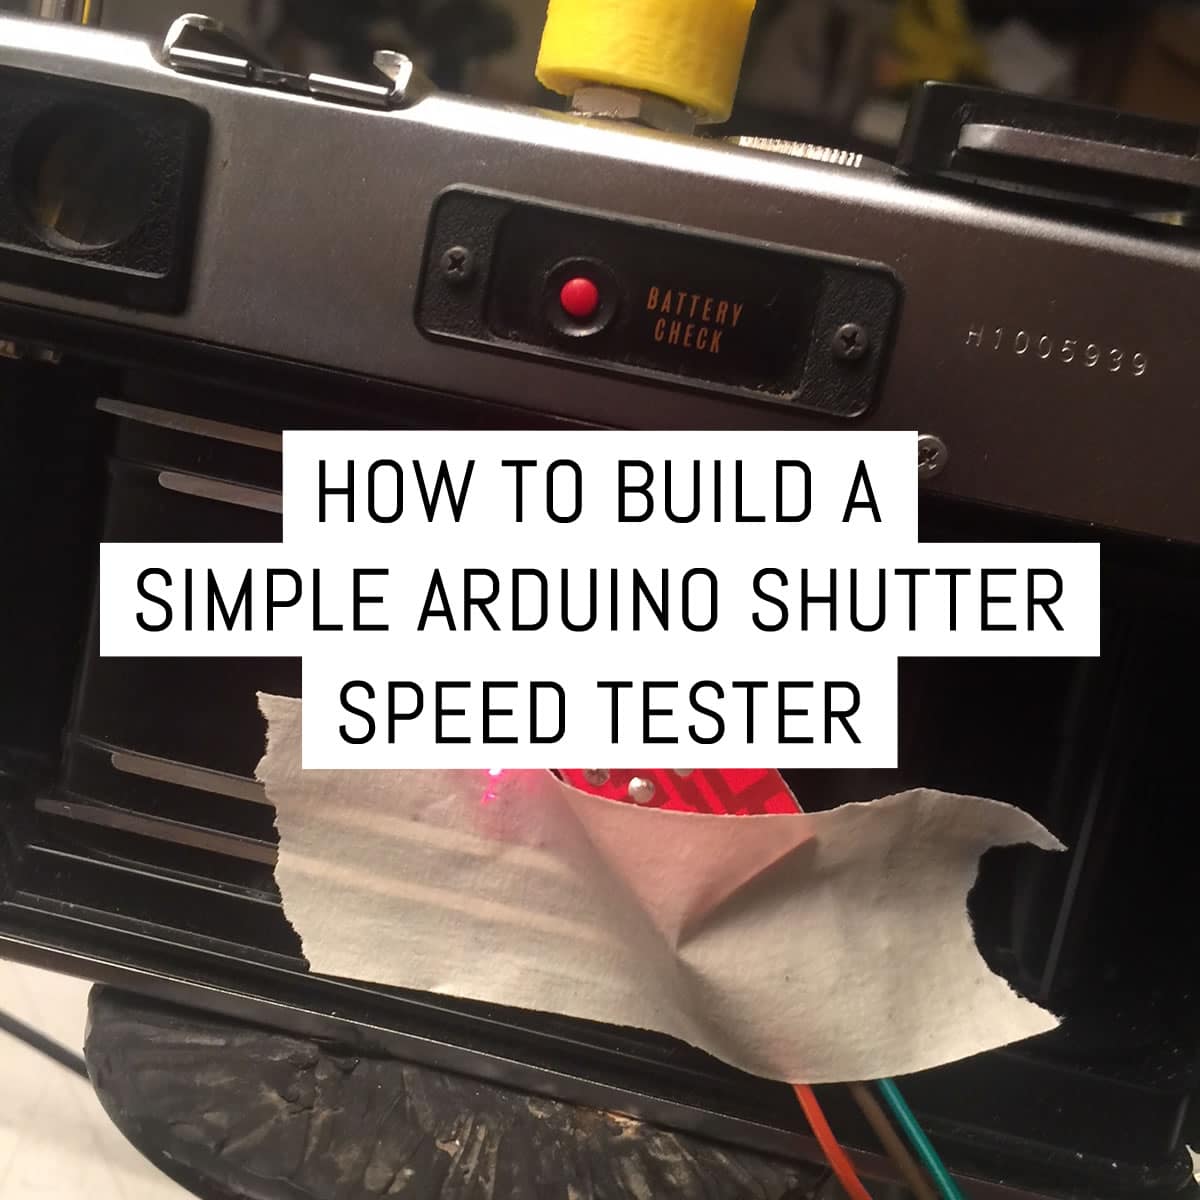 Cover - How to build a simple Arduino shutter speed tester - by Ethan Moses